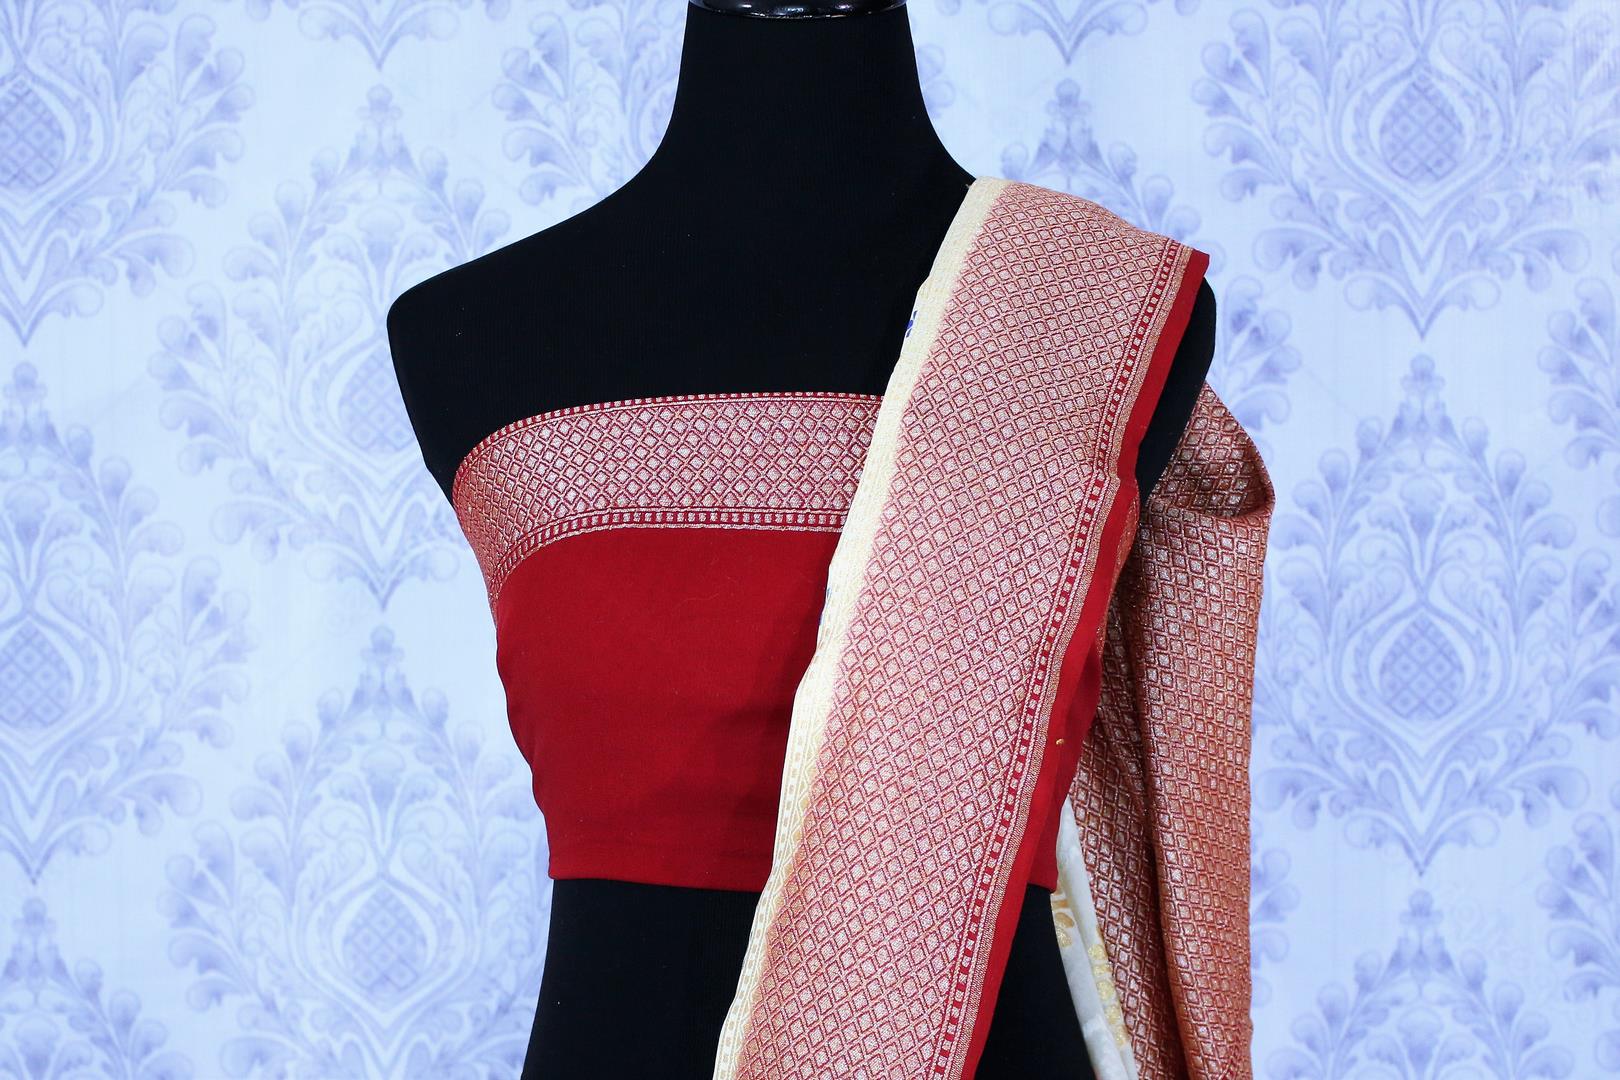 Buy cream georgette Banarasi saree online in USA. The alluring design of the saree with red zari border and minakari makes it perfect for a traditional festival look. Select from an exquisite collection of traditional Indian Banarasi sarees, designer saris at Pure Elegance clothing store or shop online.-blouse pallu